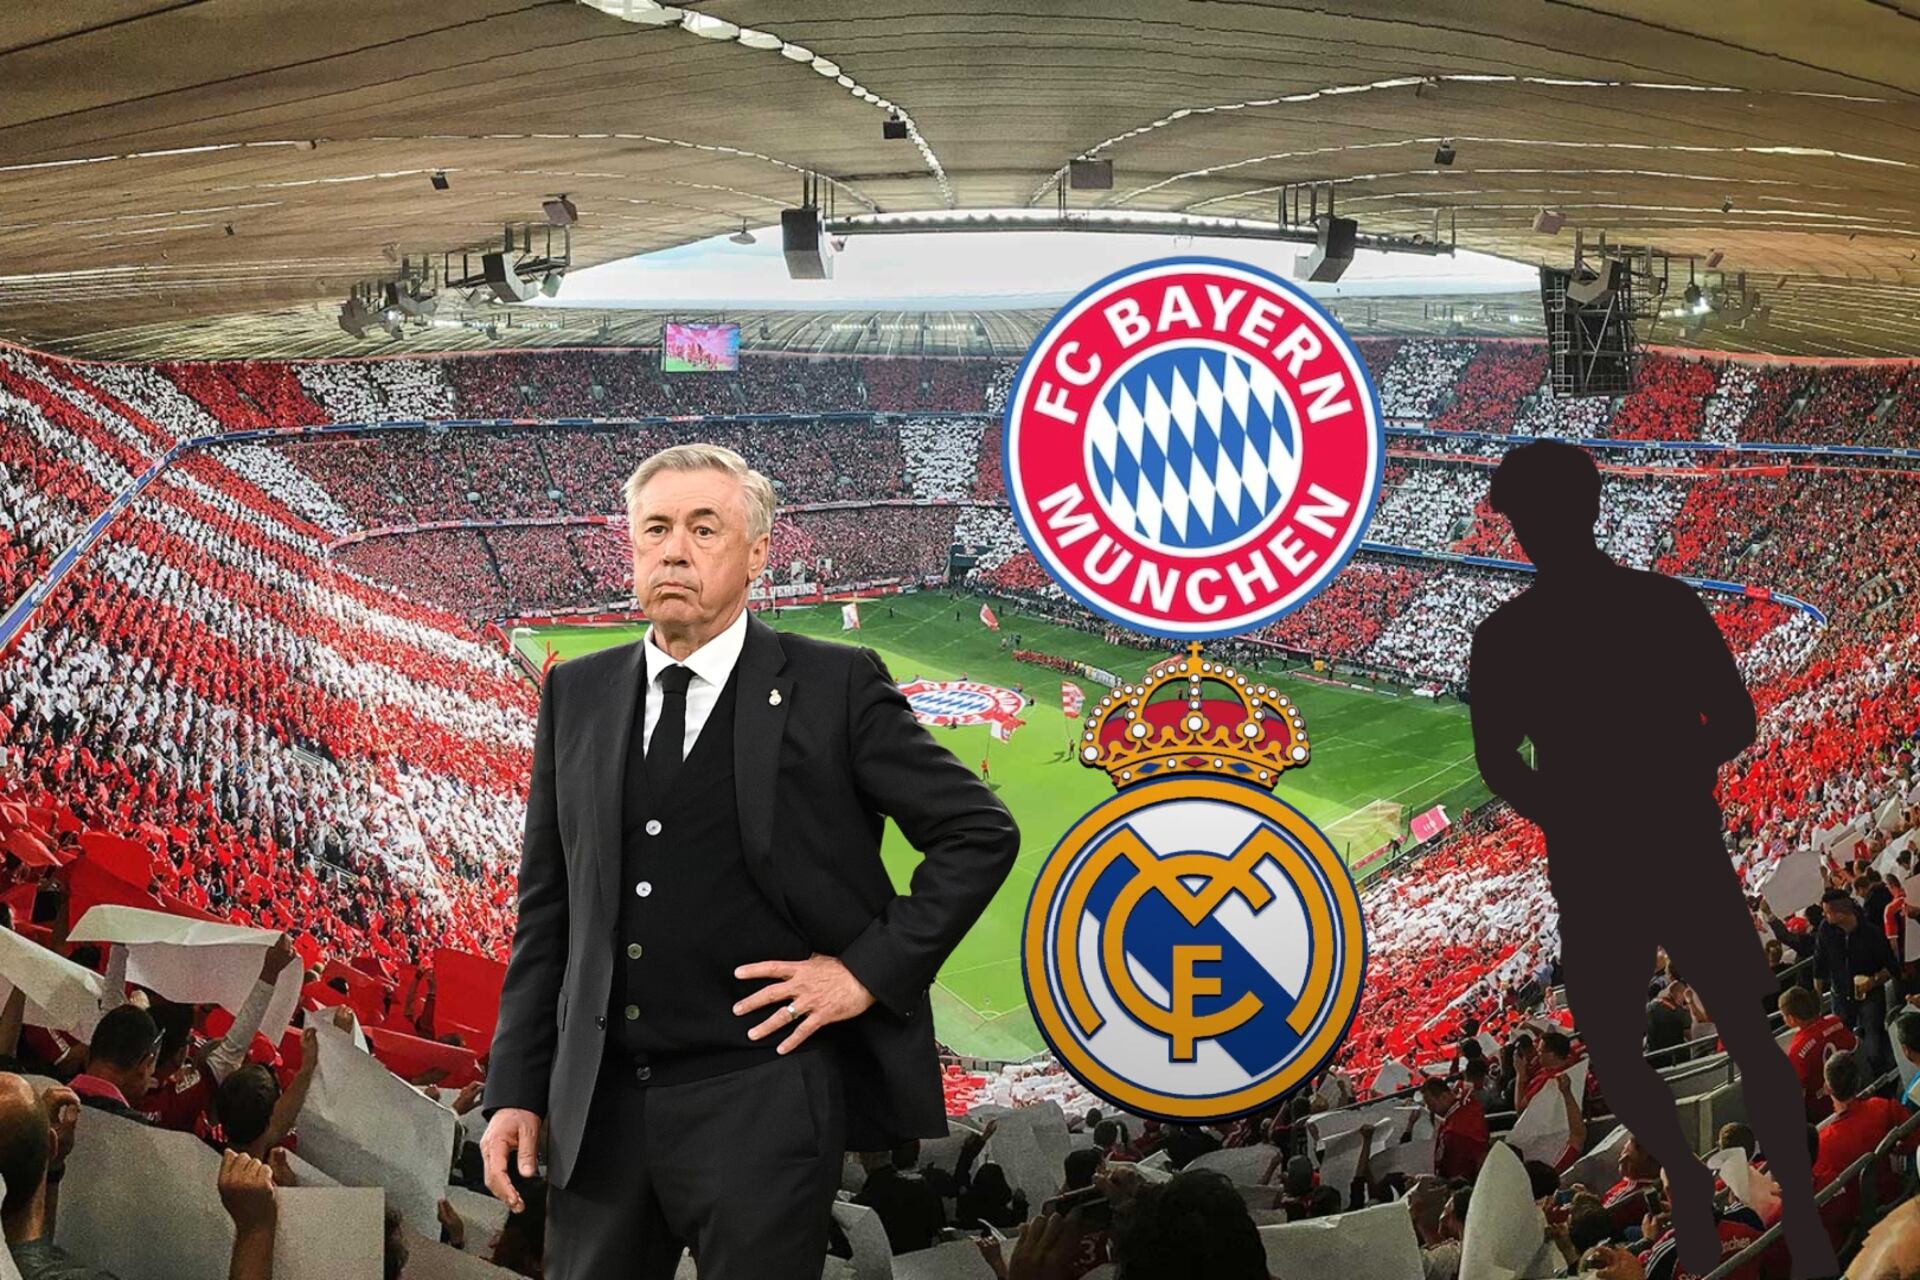 The unusual reason why Ancelotti took a 20 year old player who hasn't debuted yet with Real Madrid to Munich 